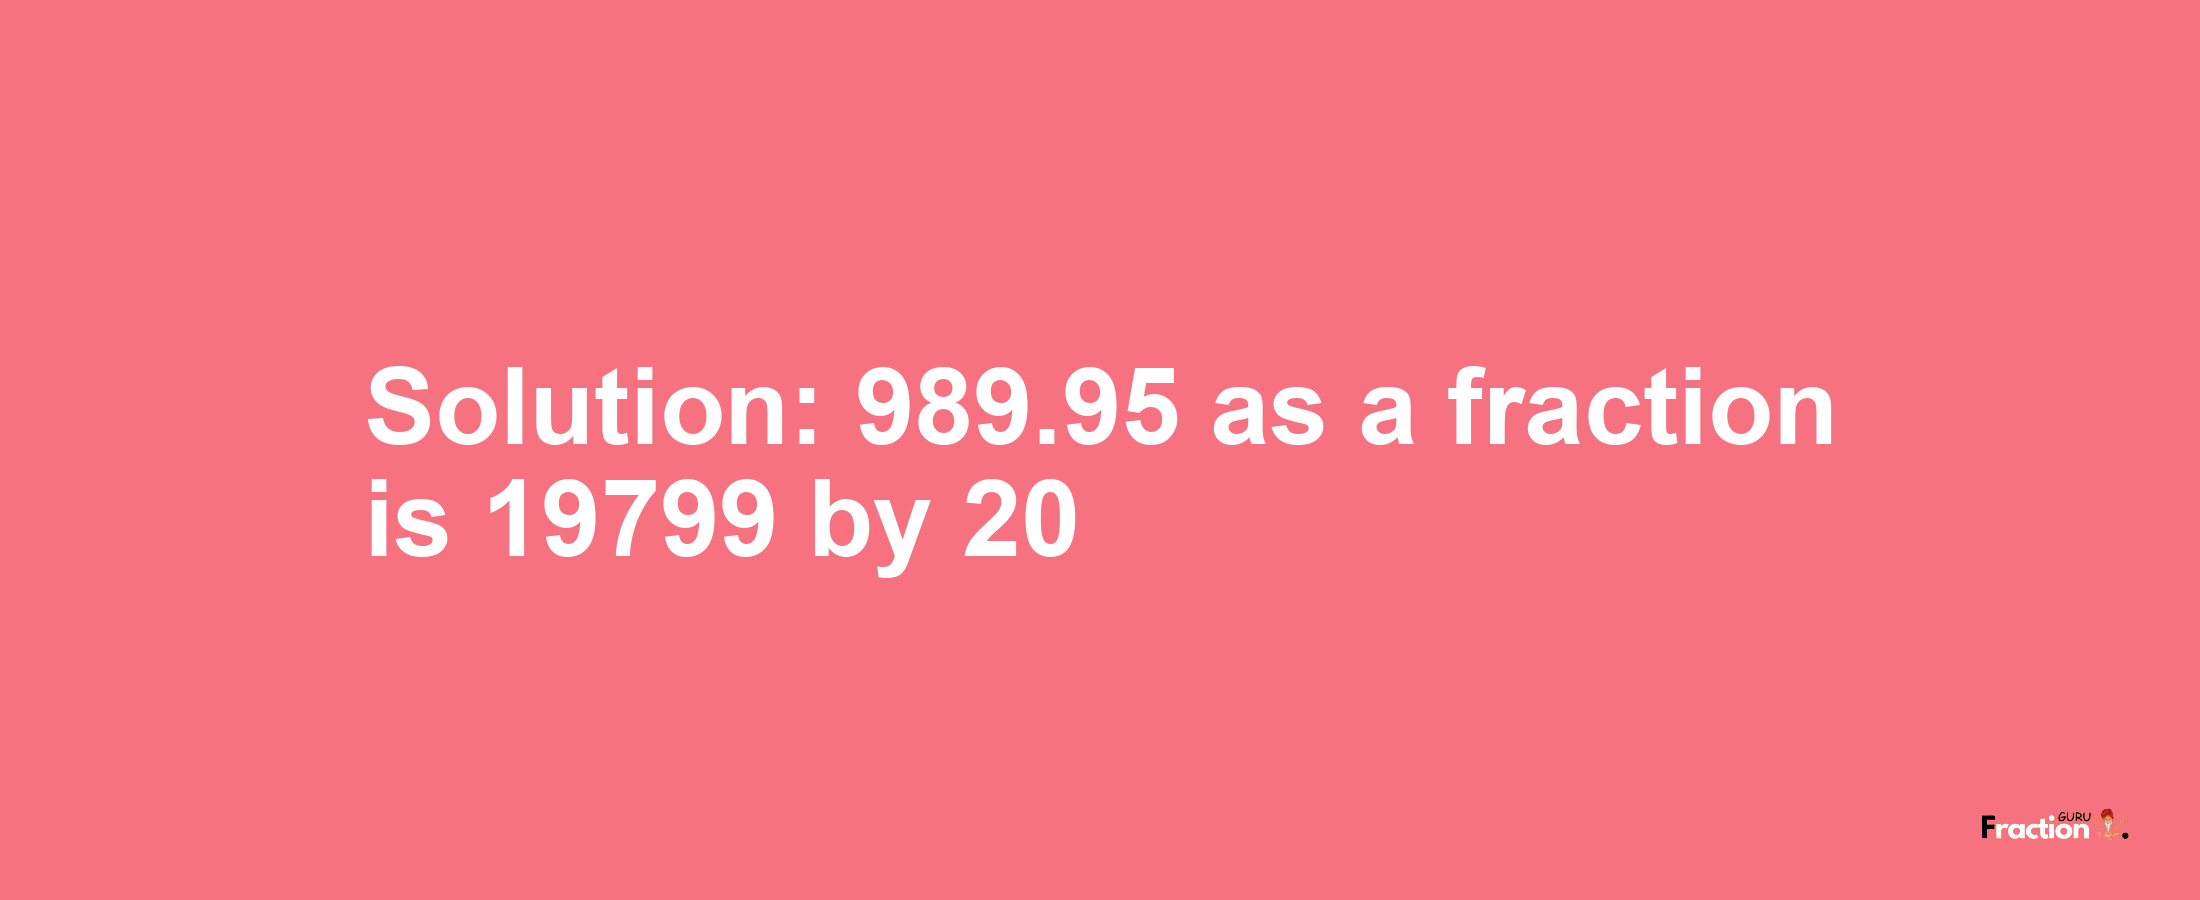 Solution:989.95 as a fraction is 19799/20